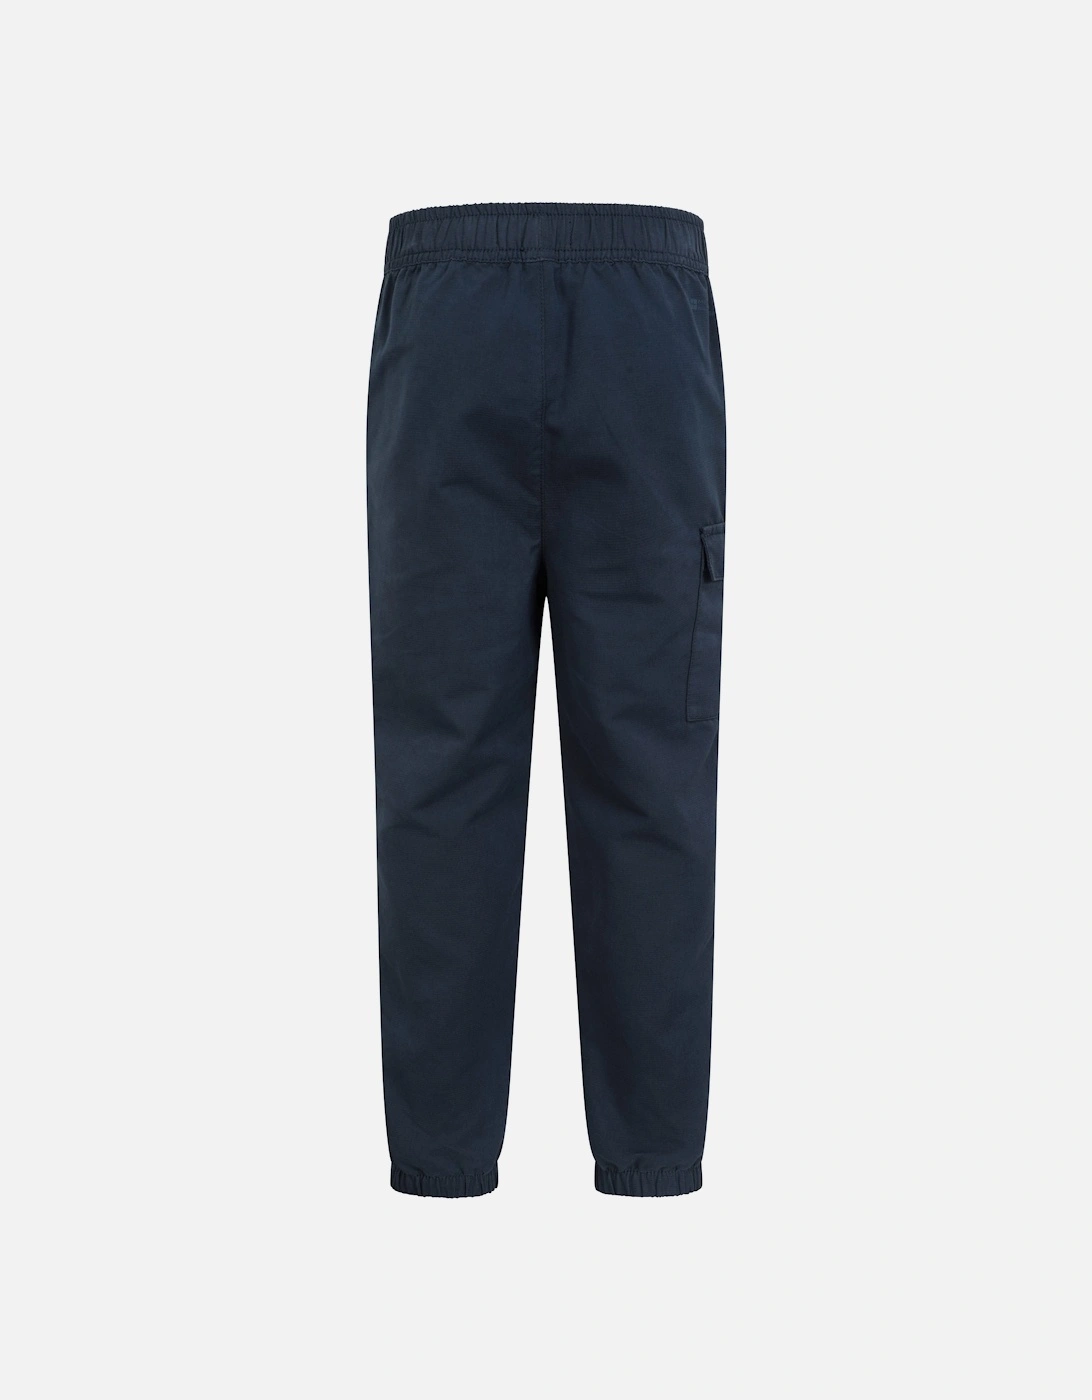 Childrens/Kids Reinforced Knee Trousers